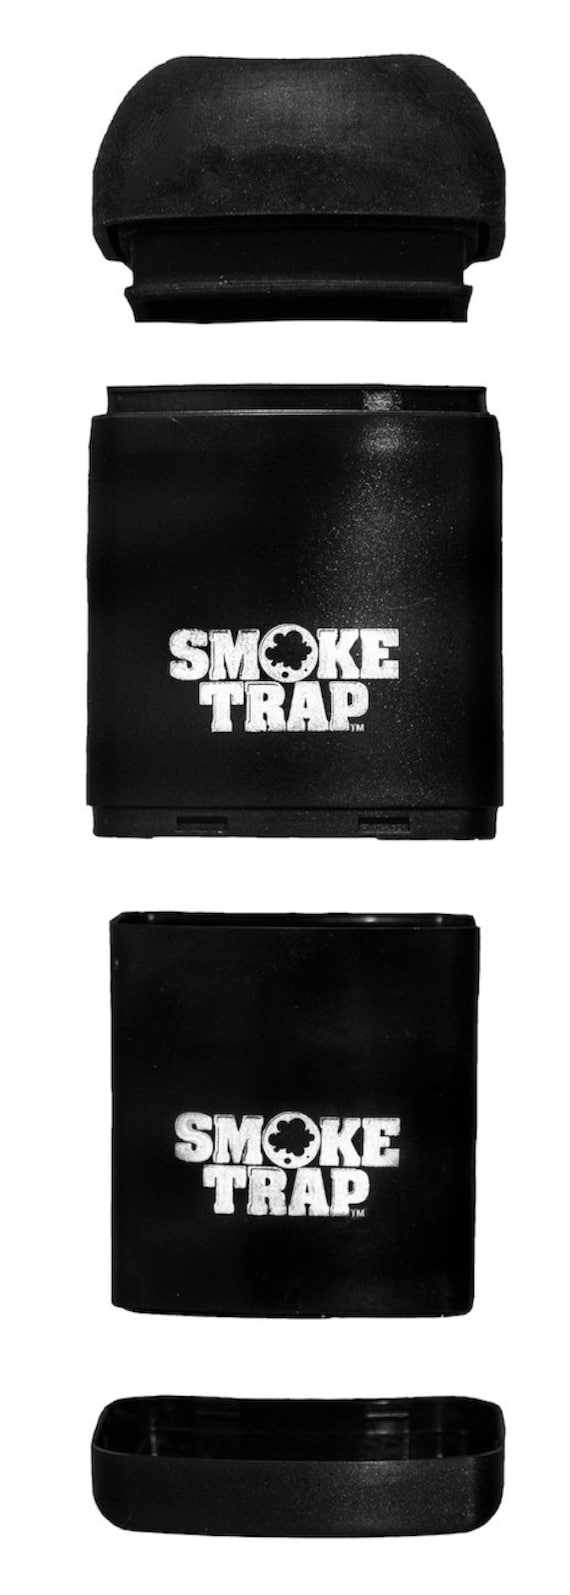 SMOKE TRAP 2.0 Personal Air Filter sploof/buddy Smoke Filter With  Replaceable Filter Cartridges Long-lasting 300 Uses black -  Israel